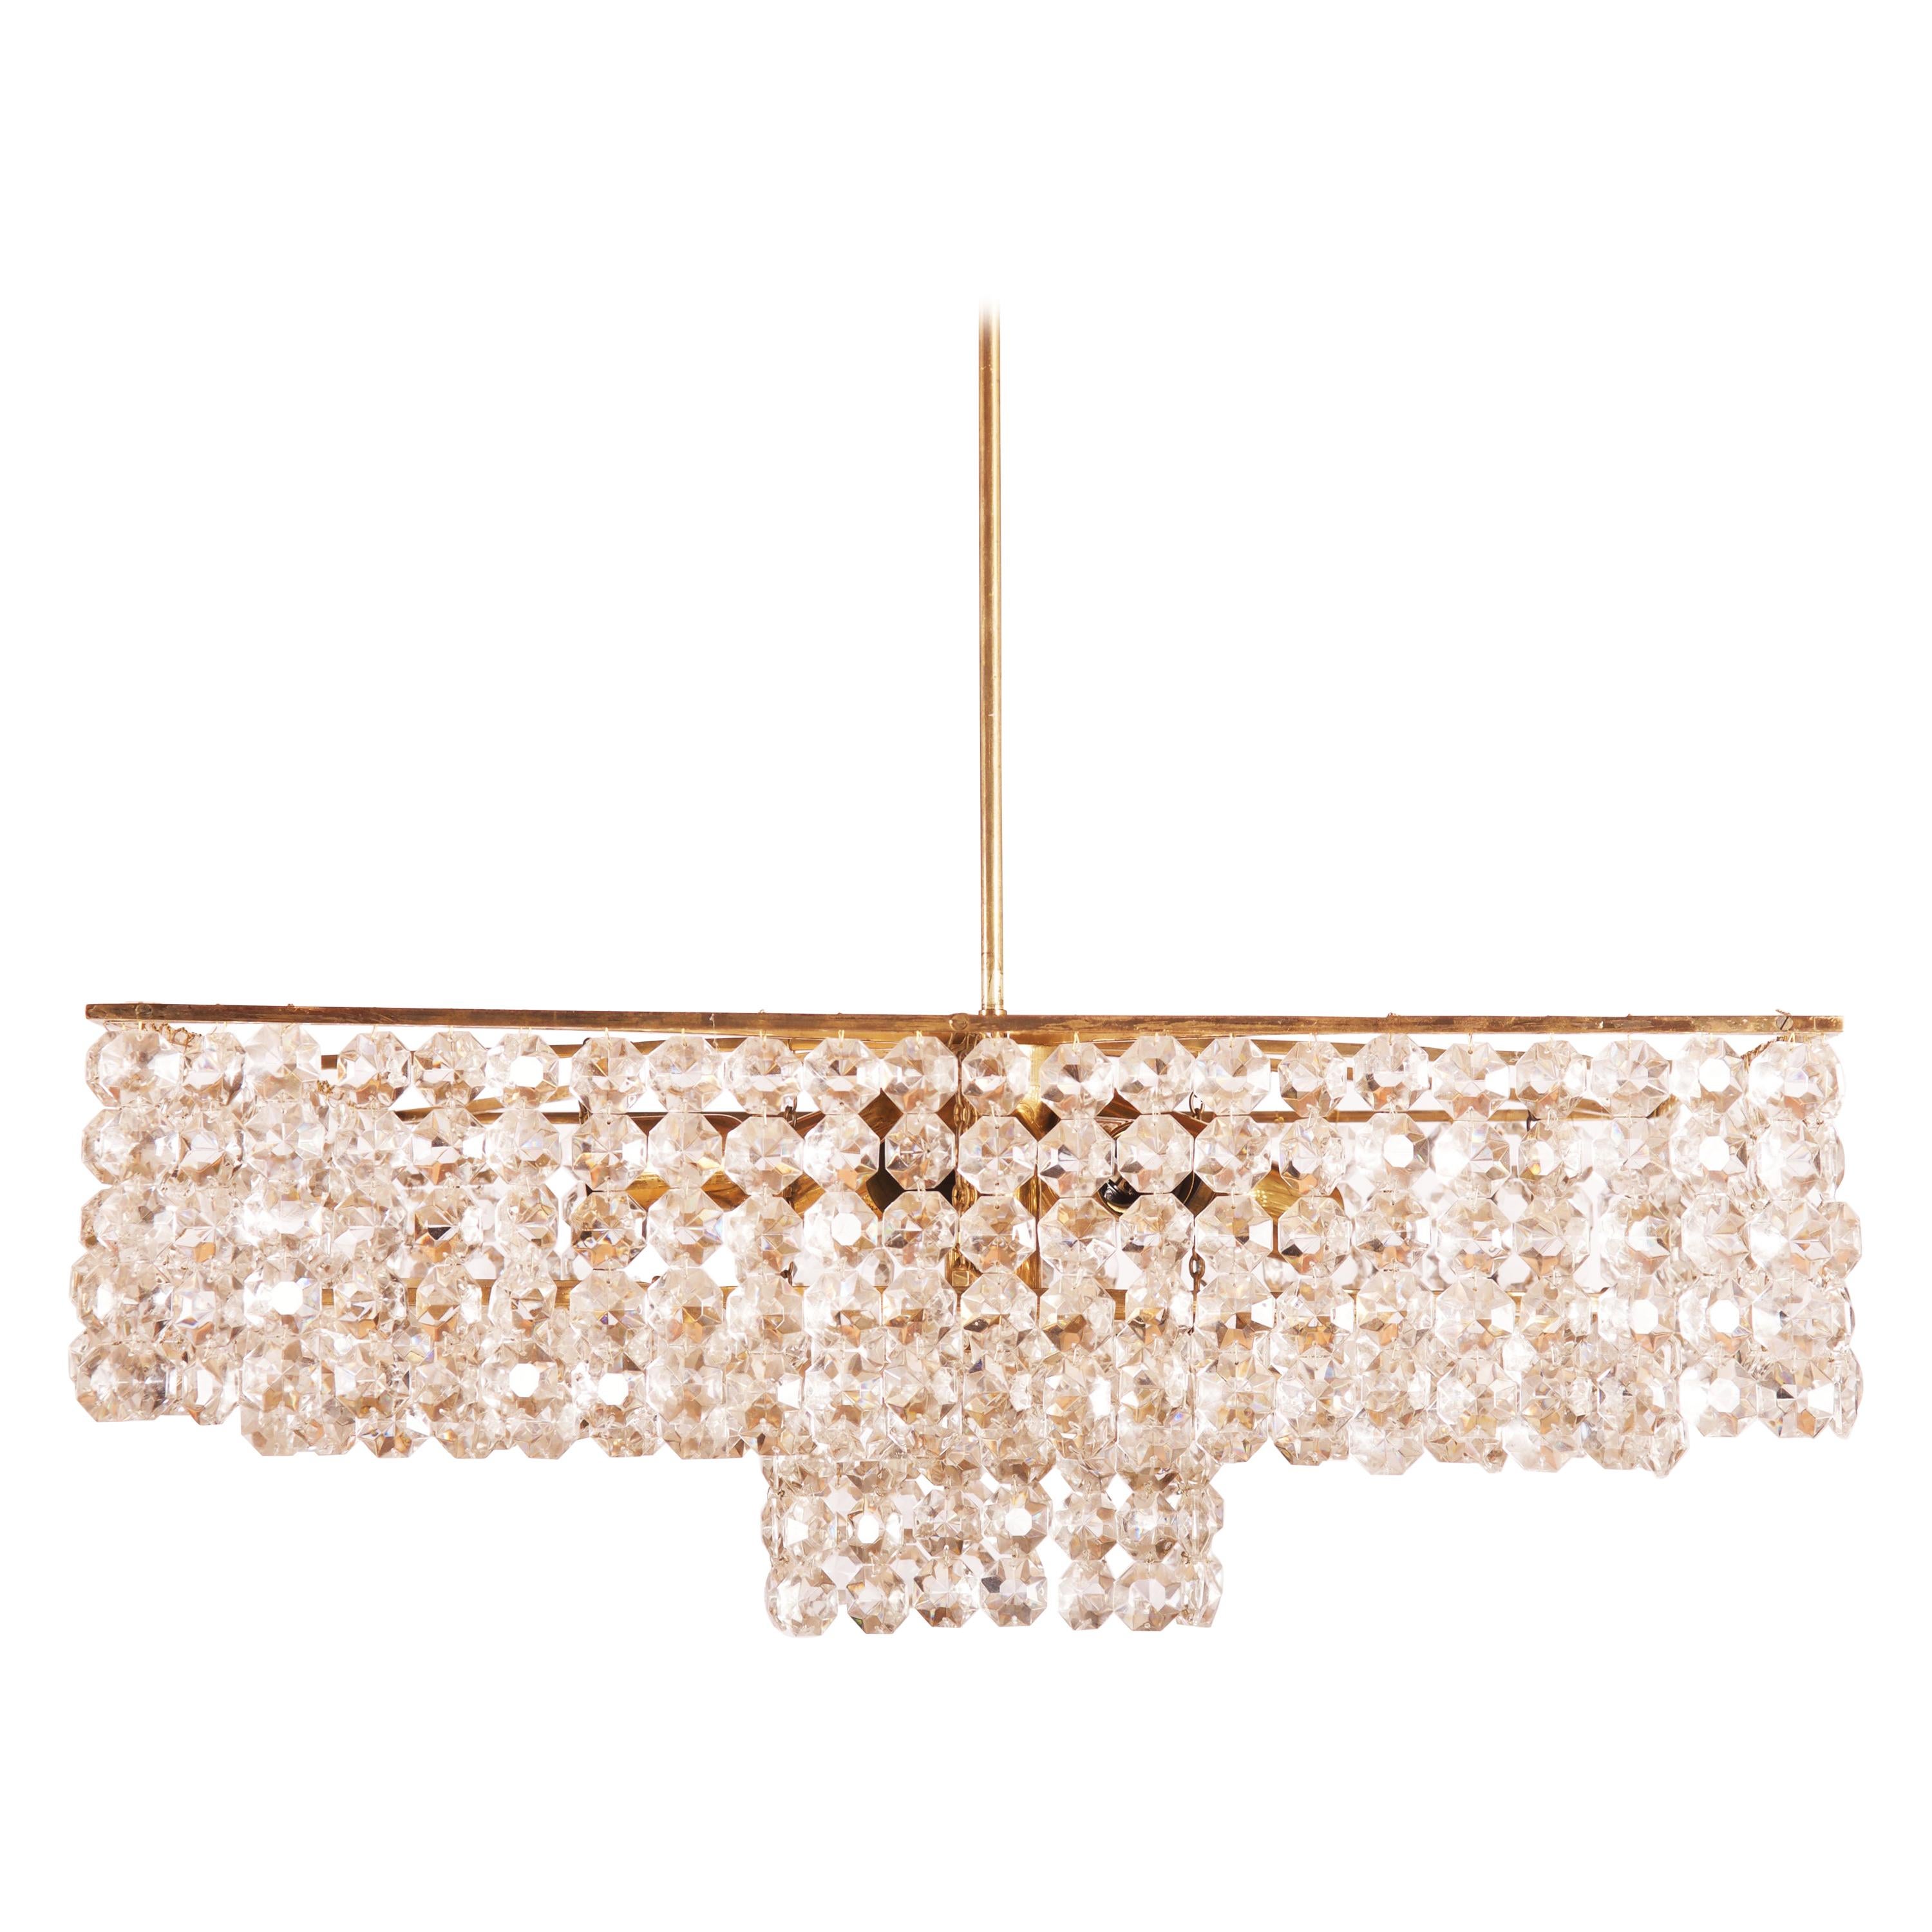 Midcentury Square Cut Crystal Chandelier For Sale